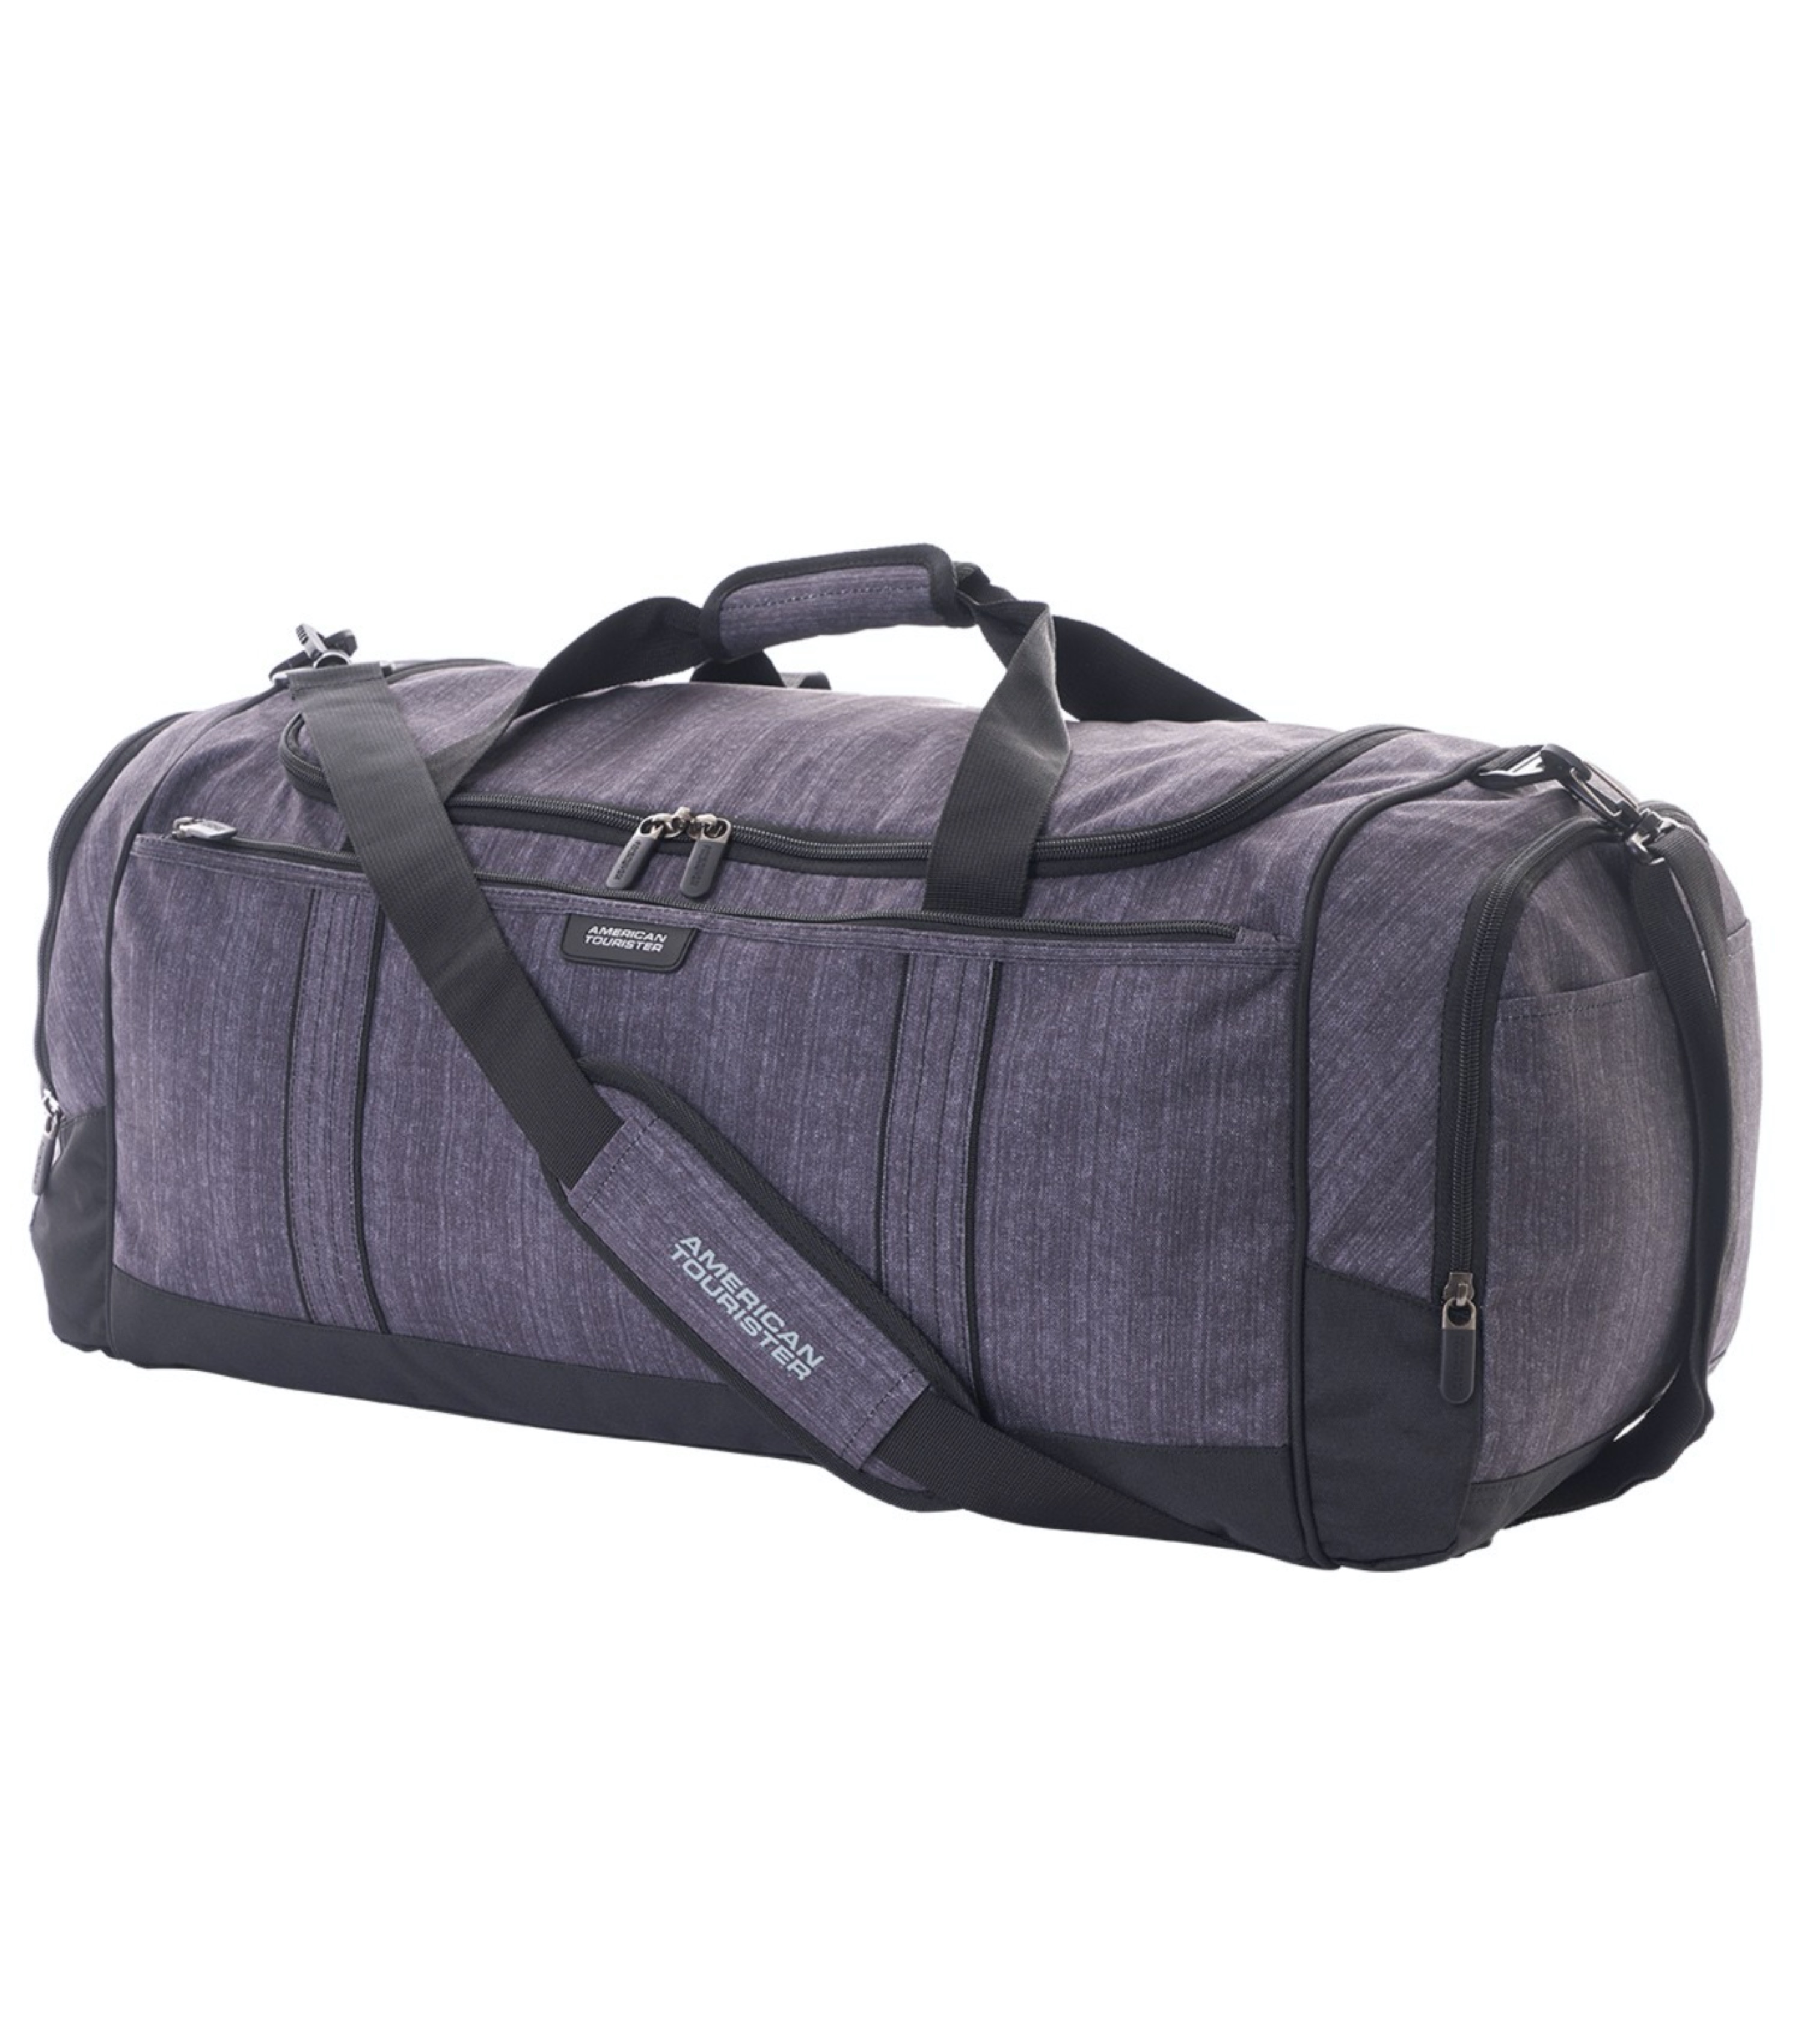 American Tourister Duffle Blue 52 centimeters Navy